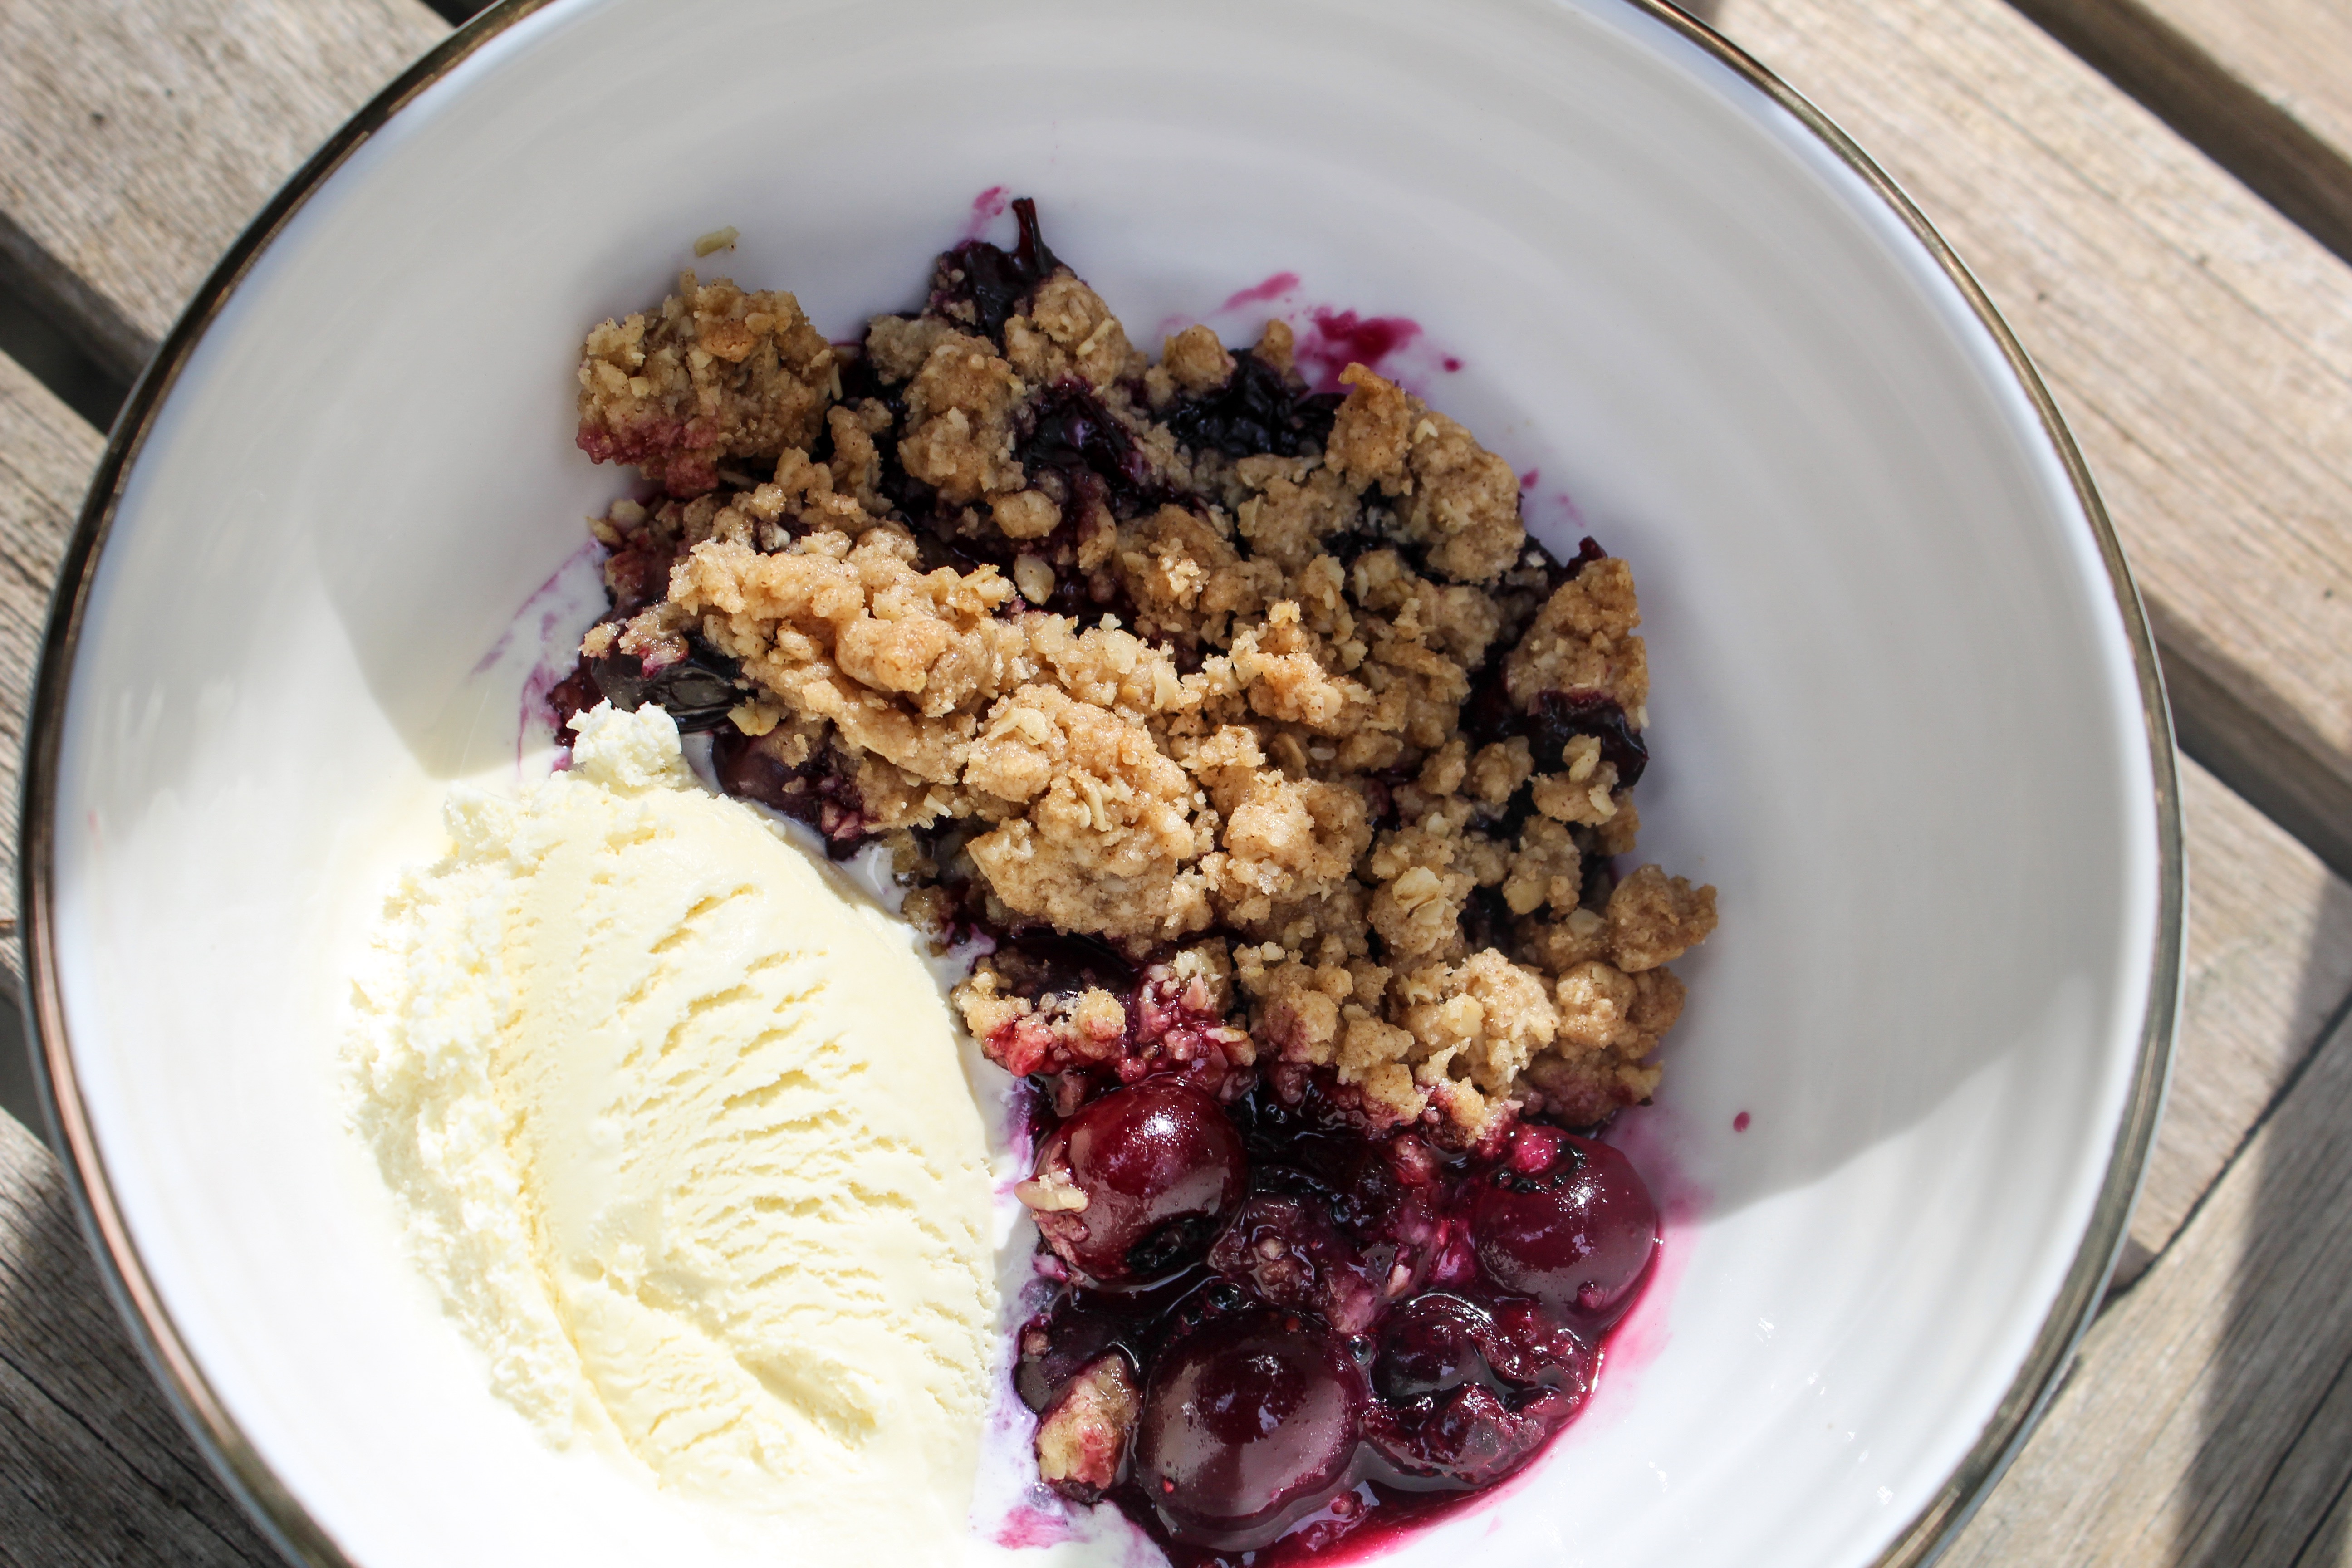 Nothing says summer like a blueberry crumble with a scoop of vanilla ice cream!